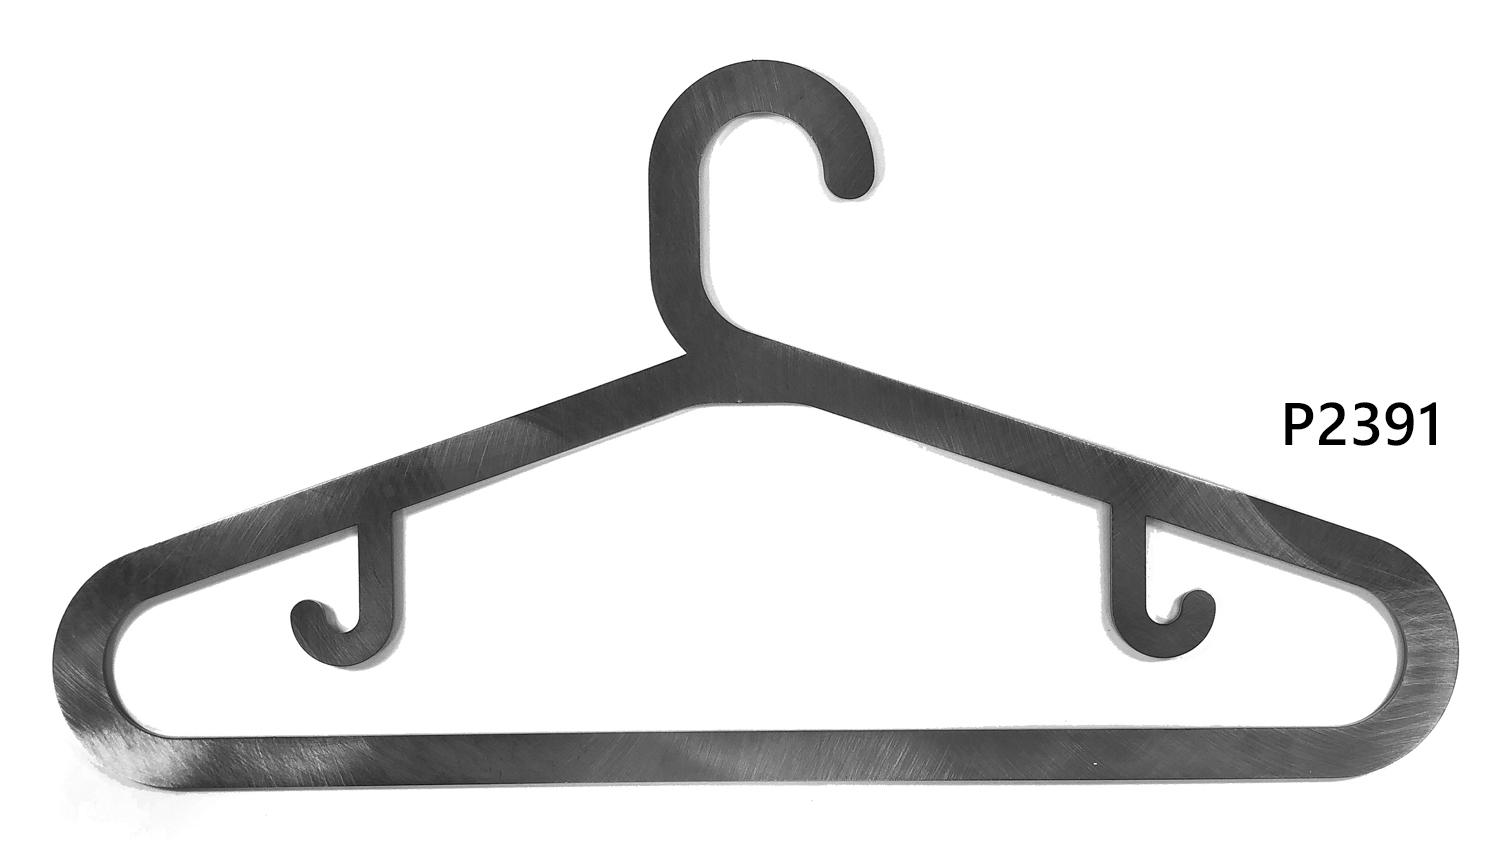 Hanger for clothes